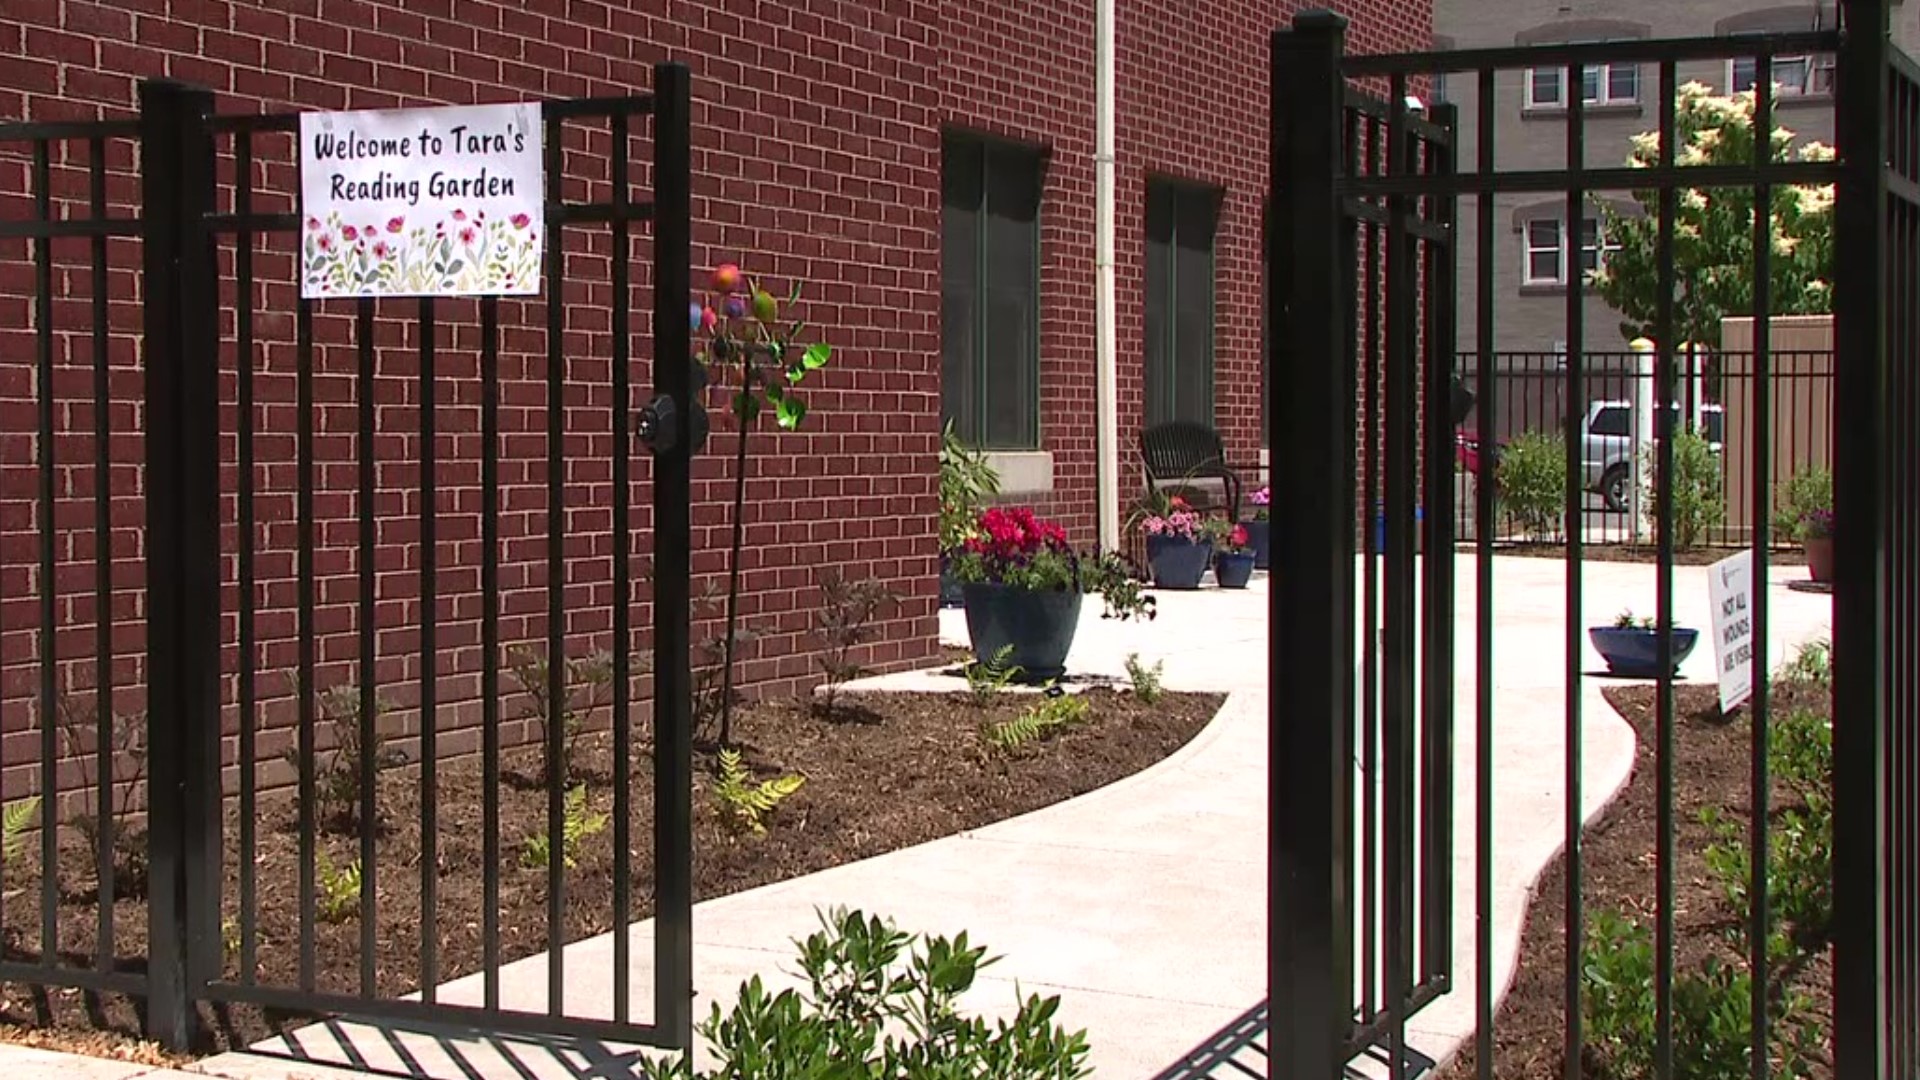 People who use the Bloomsburg Public Library will now be able to read outside, as the library opened a reading garden.